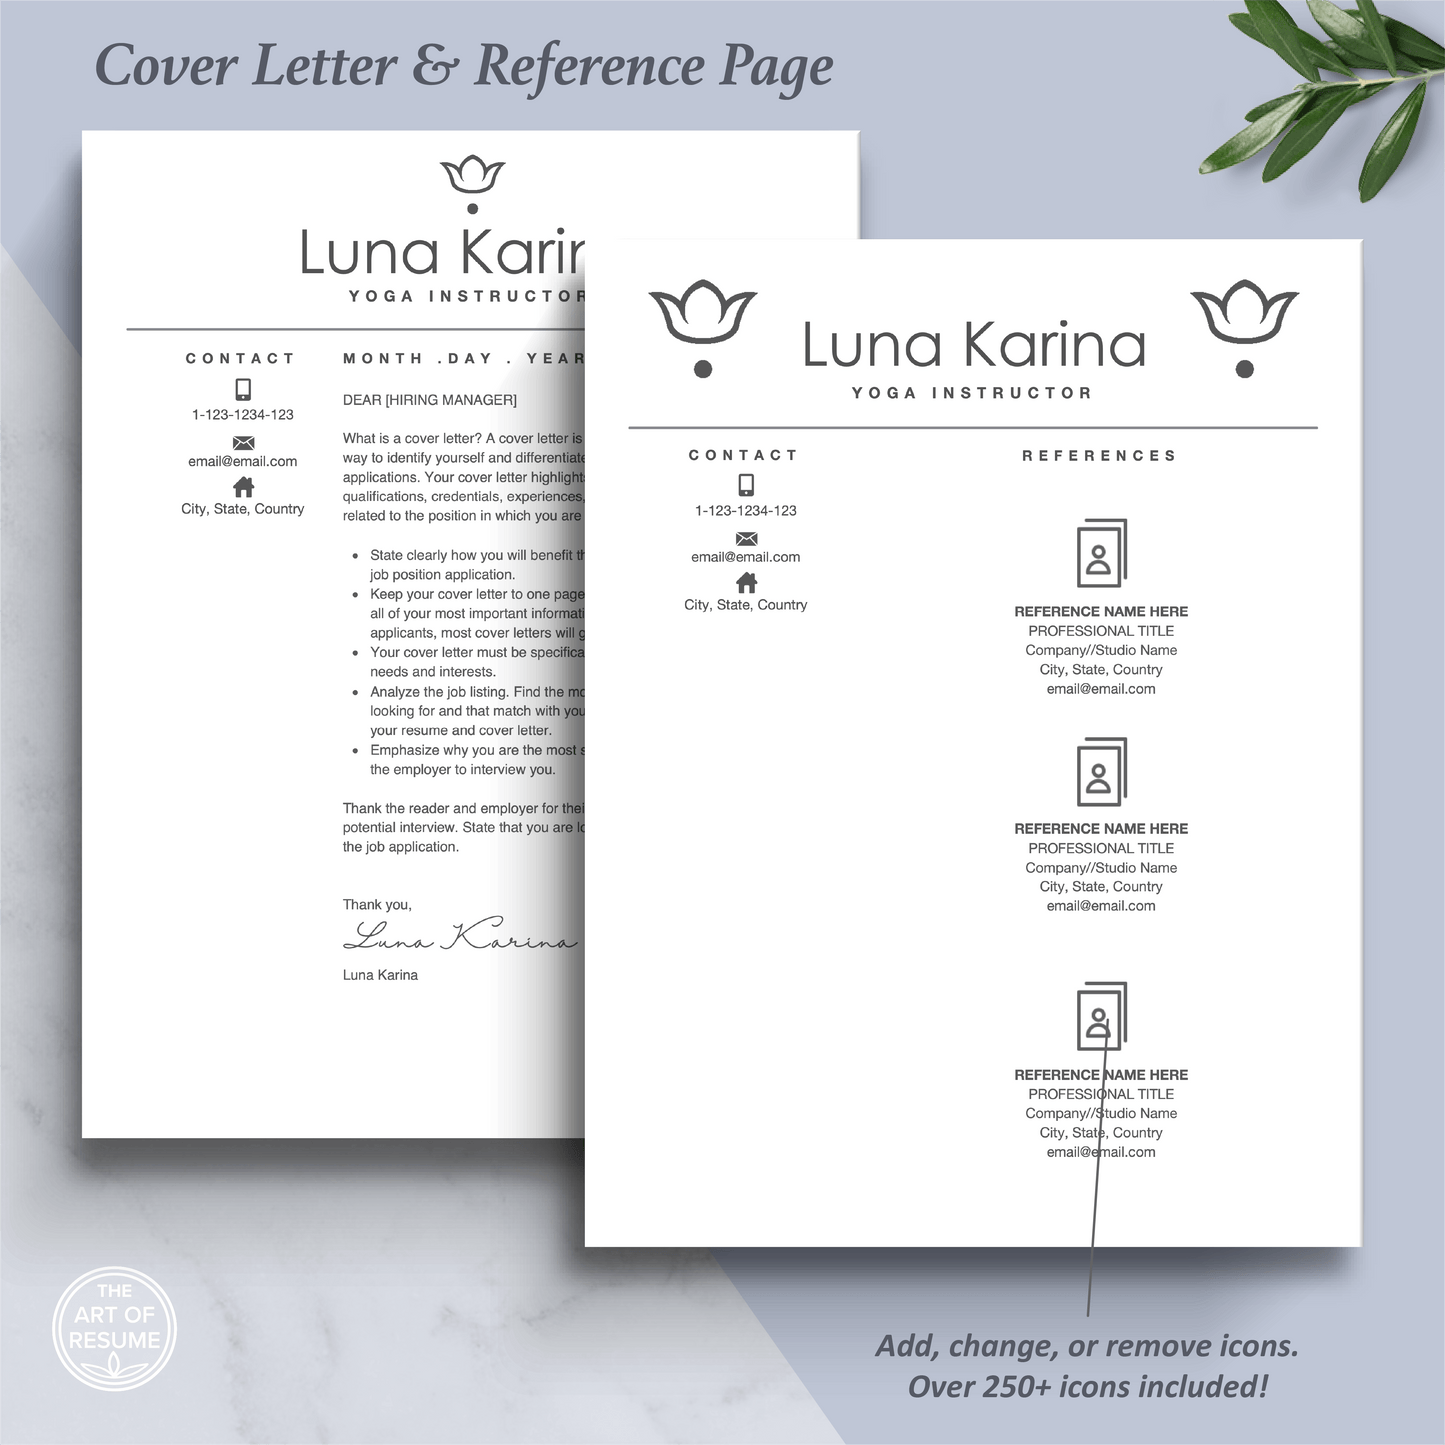 The Art of Resume Templates | Professional Professional Yoga, Fitness, Designer Letter and Reference Page Design Templates Instant Download